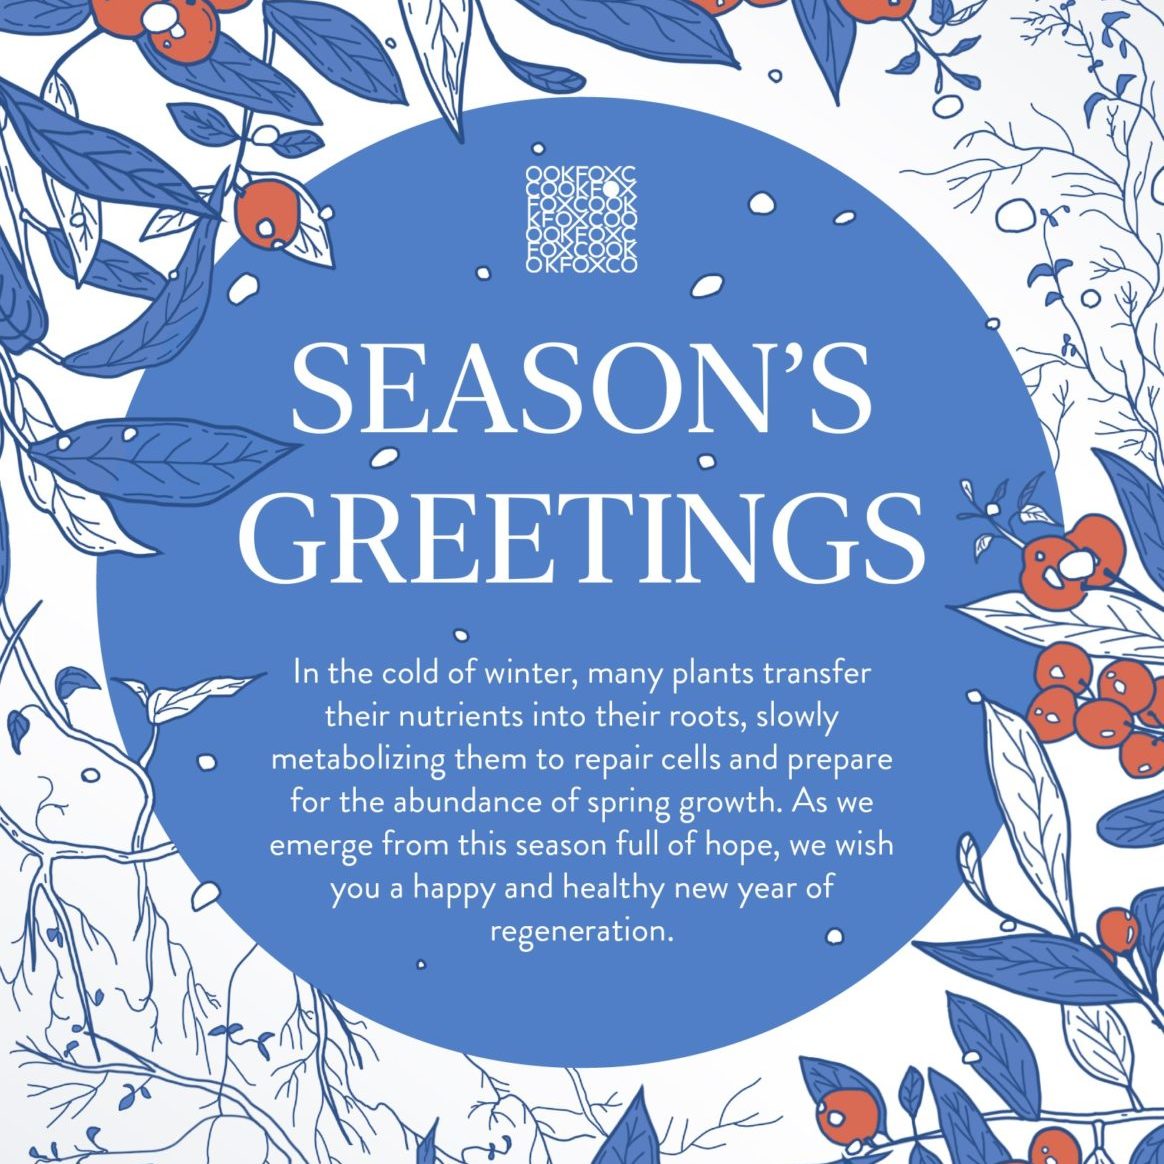 Season’s Greetings. In the cold of winter, many plants transfer their nutrients into their roots, slowly metabolizing them to repair cells and prepare for the abundance of spring growth. As we emerge from this season full of hope, we wish you a happy and healthy new year of regeneration.